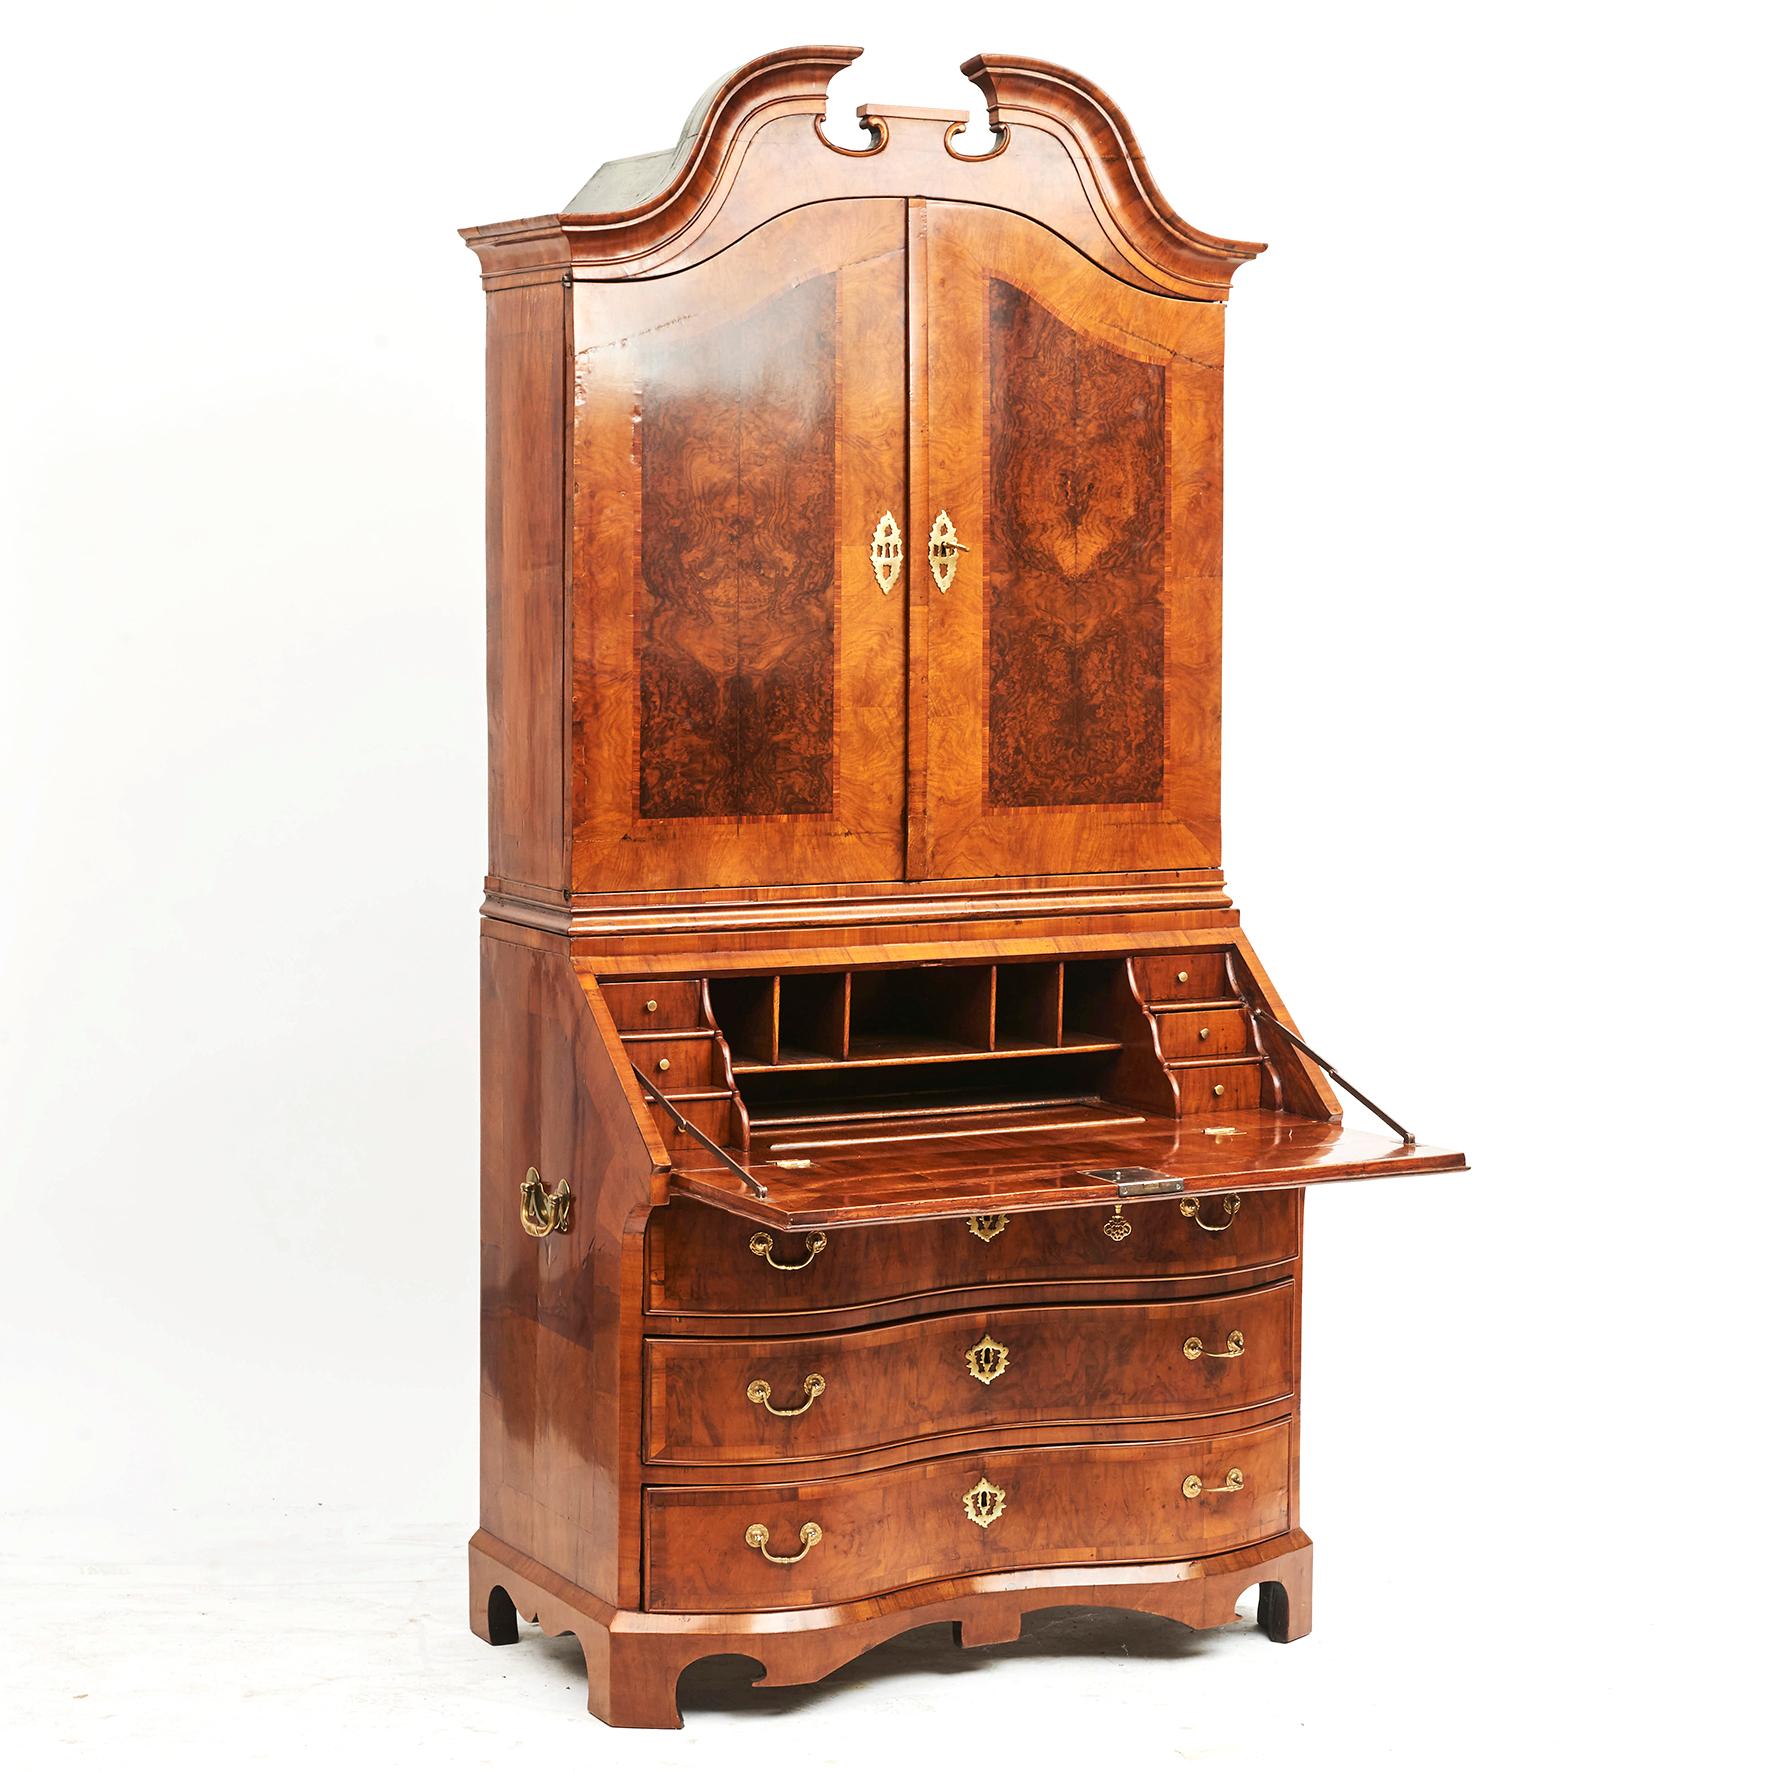 Early 18th century burl walnut veneered bureau cabinet.
The upper section with swan neck top over double doors, the lower section with a sloping-front opening to reveal a cupboard and six small drawers.
Original locks and hardware.

Denmark or